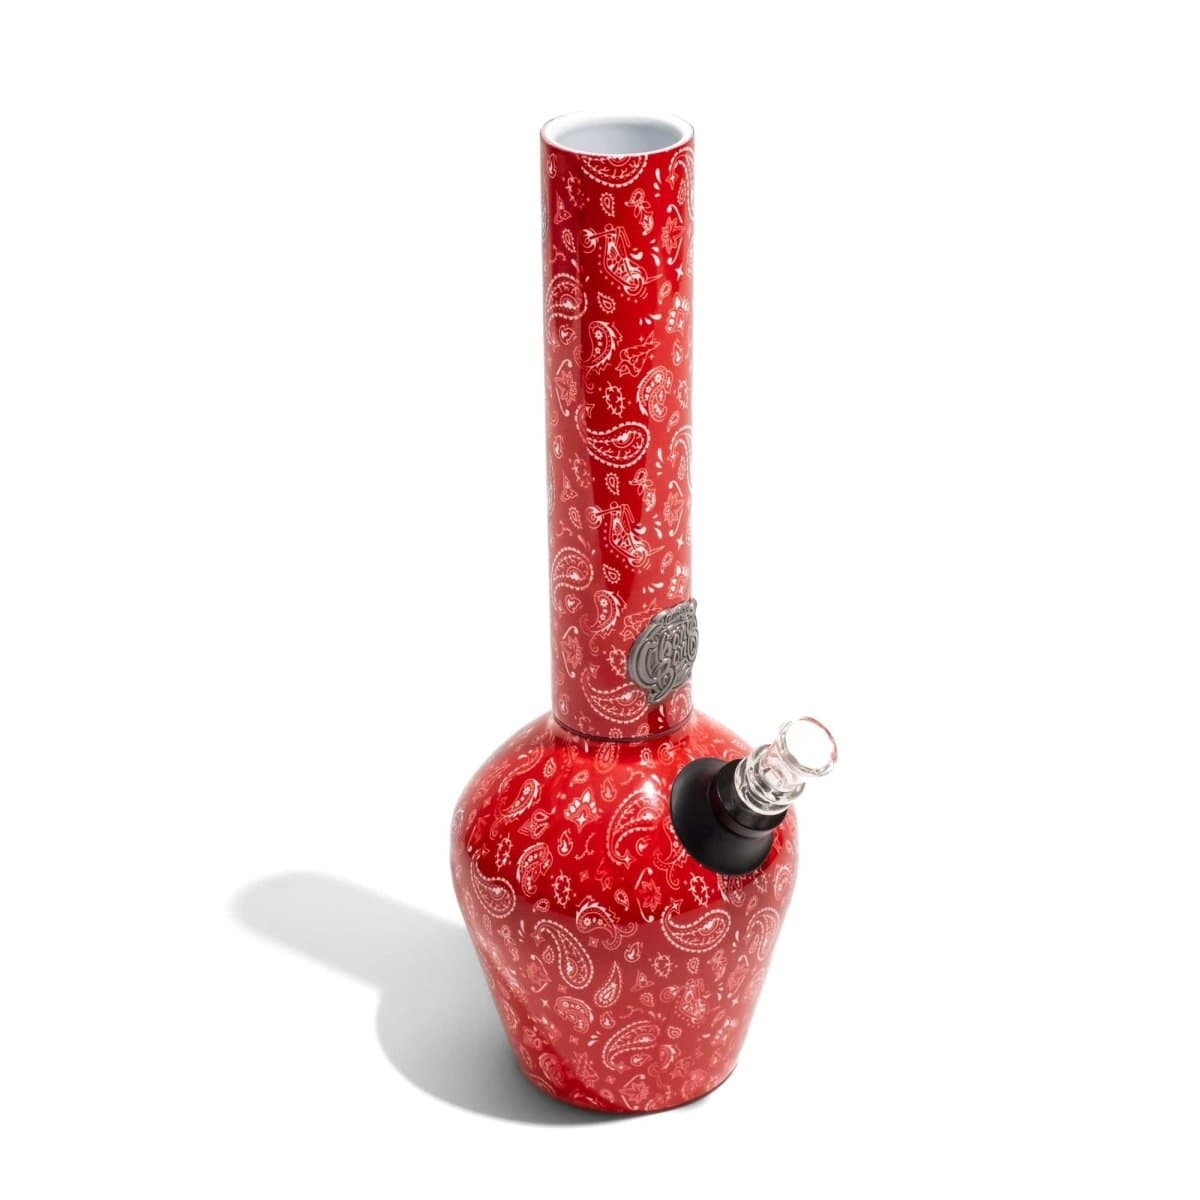 Chill Steel Pipes Red Paisley Bandana Limited Edition Tommy Chong Chill Bong